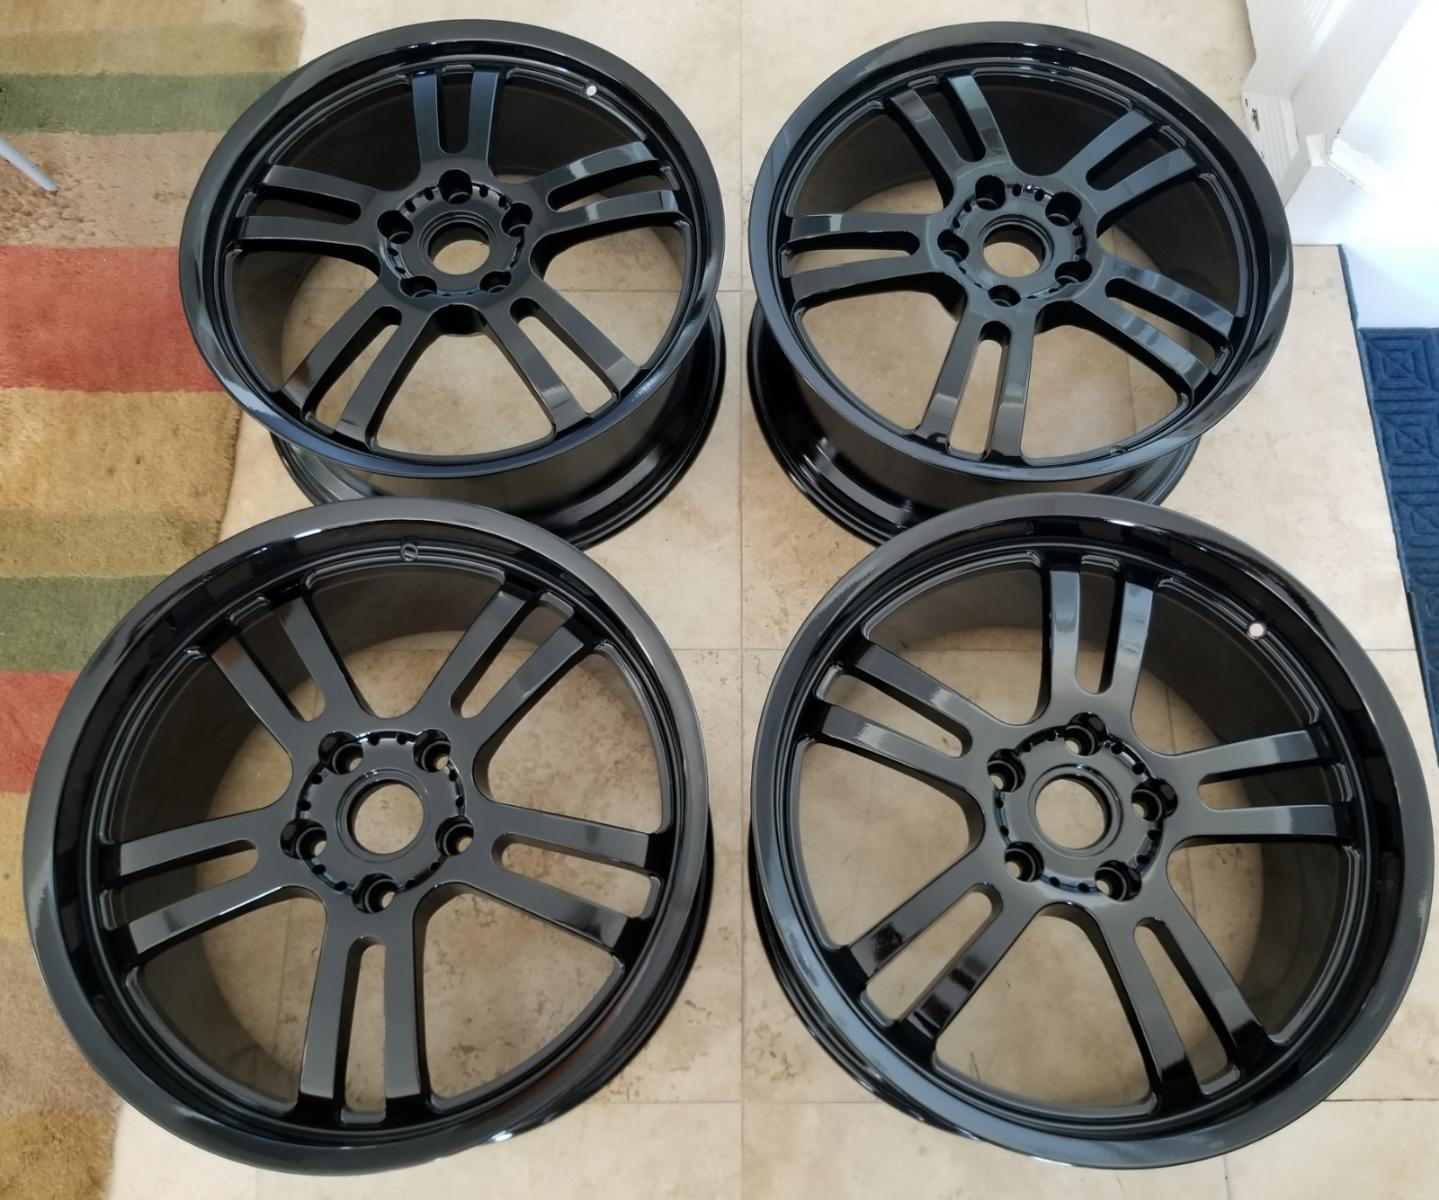 Wheels and Tires/Axles - CHAMPION RS-128 FORGED WHEELS 997 991 CAYENNE - Used - 2005 to 2019 Porsche 911 - Treasure Island, FL 33706, United States